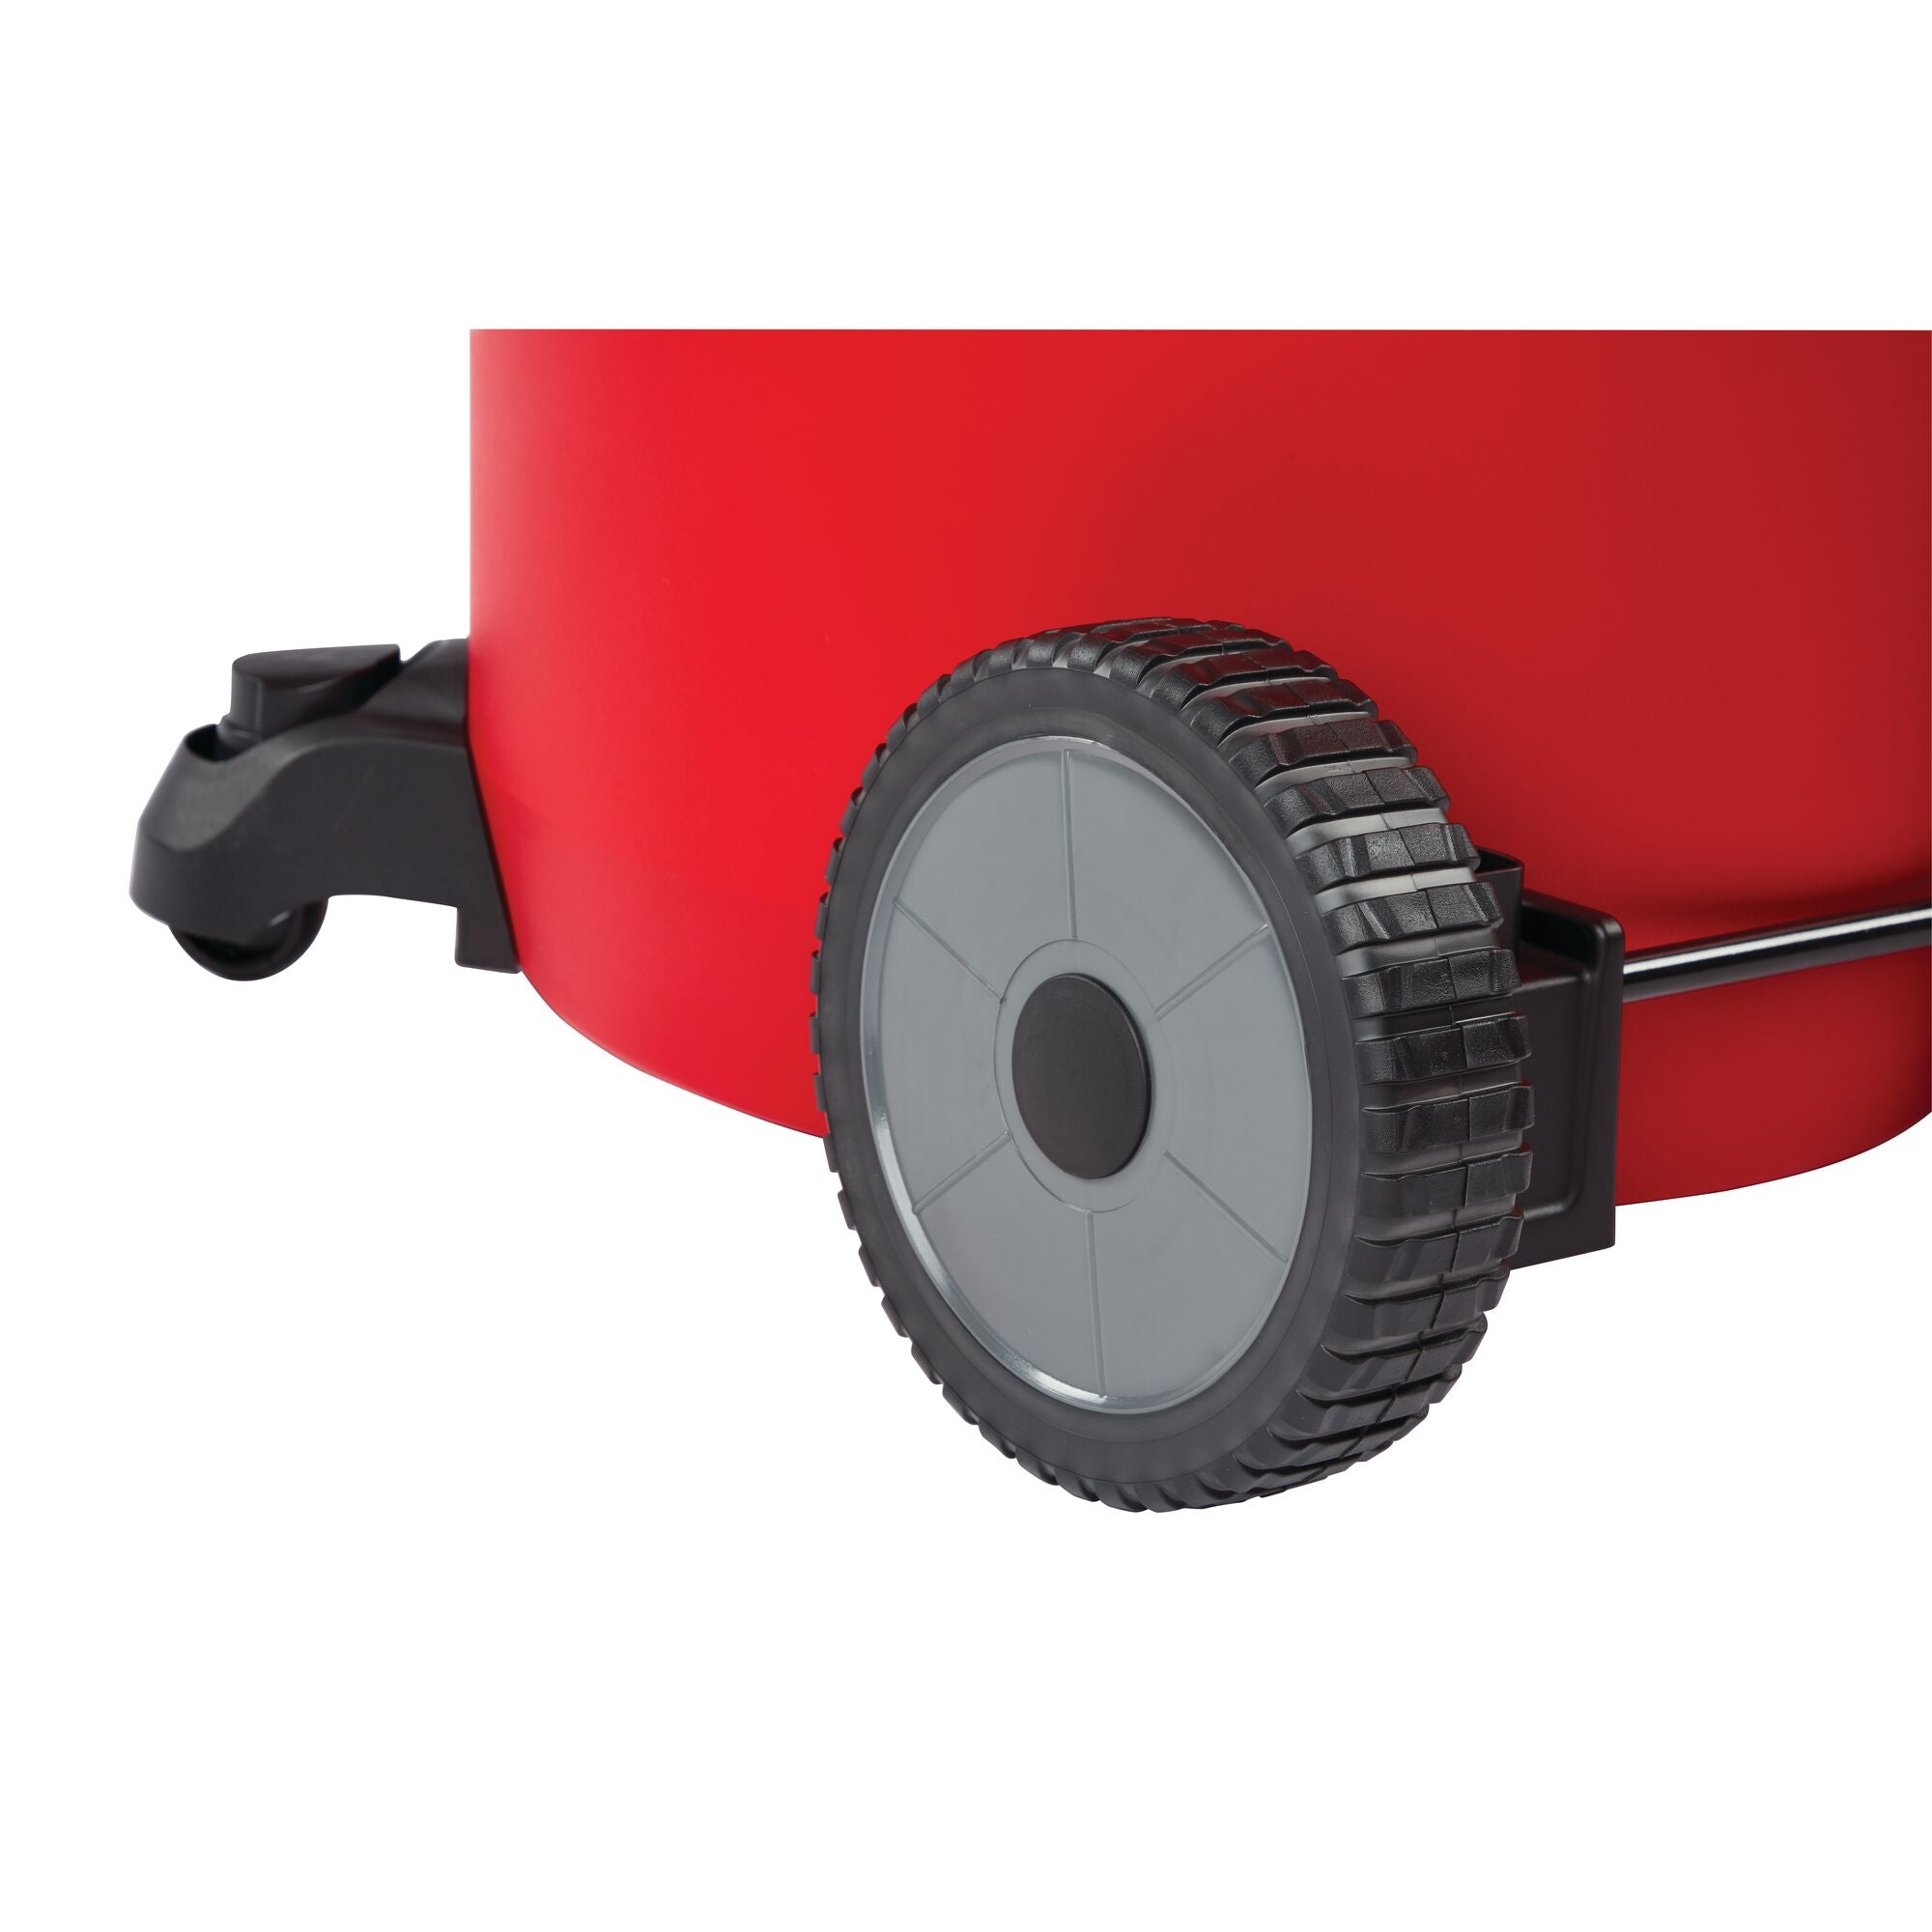 Wheel feature of 20 gallon 6.5 H P wet dry vacuum with cart.